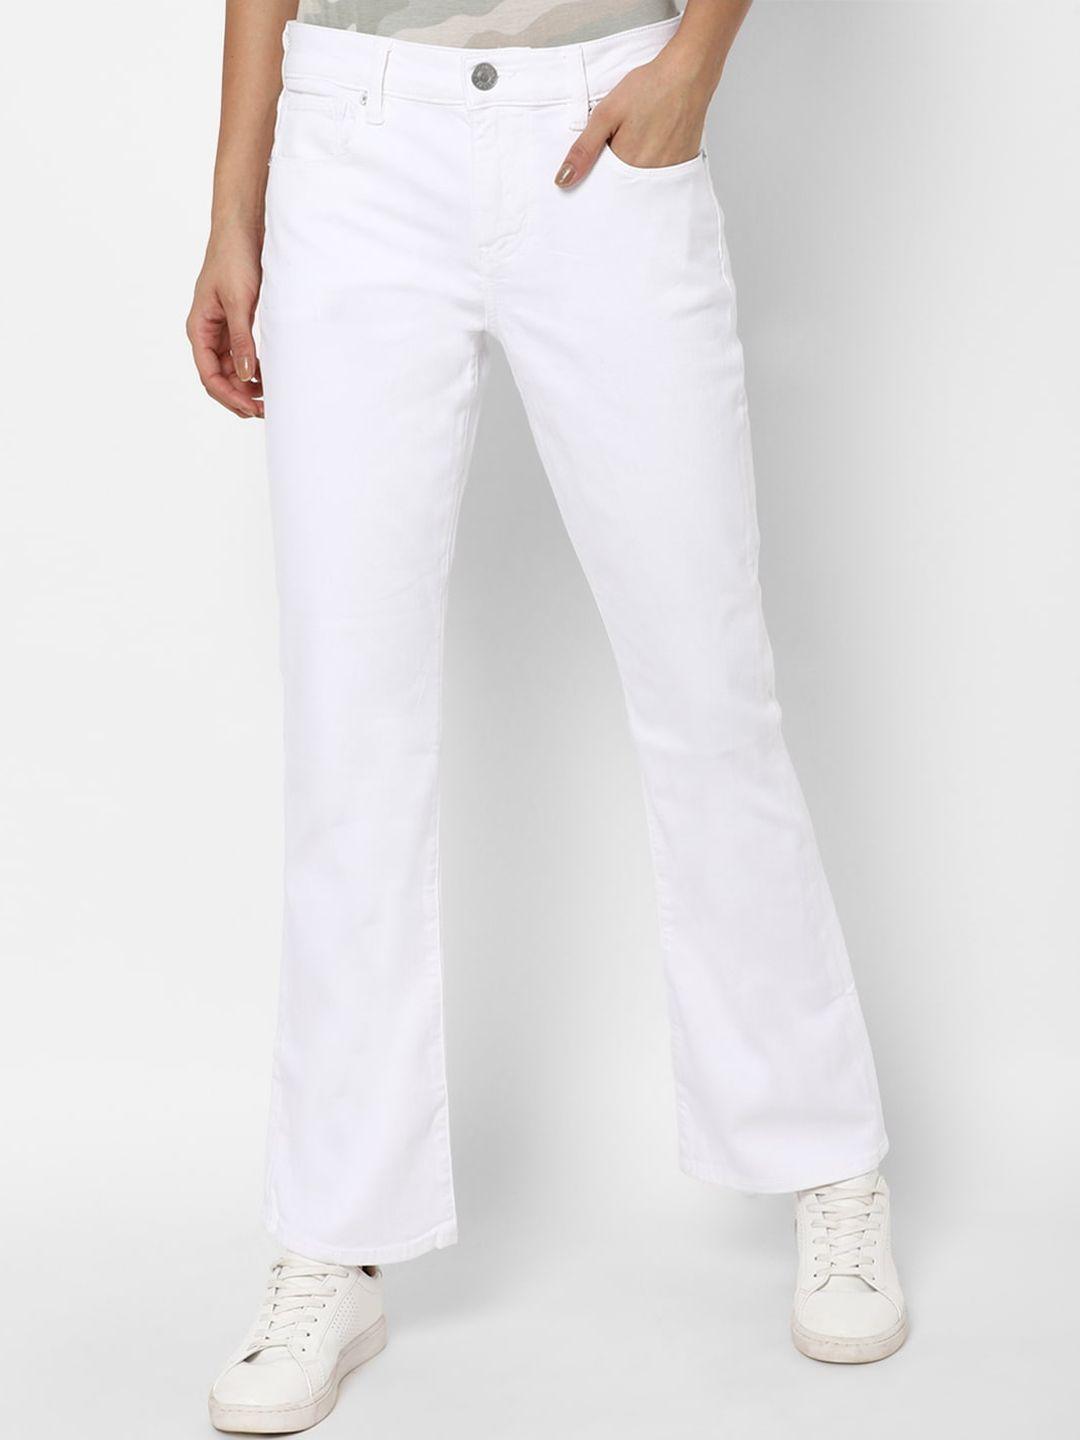 american eagle outfitters women white jeans